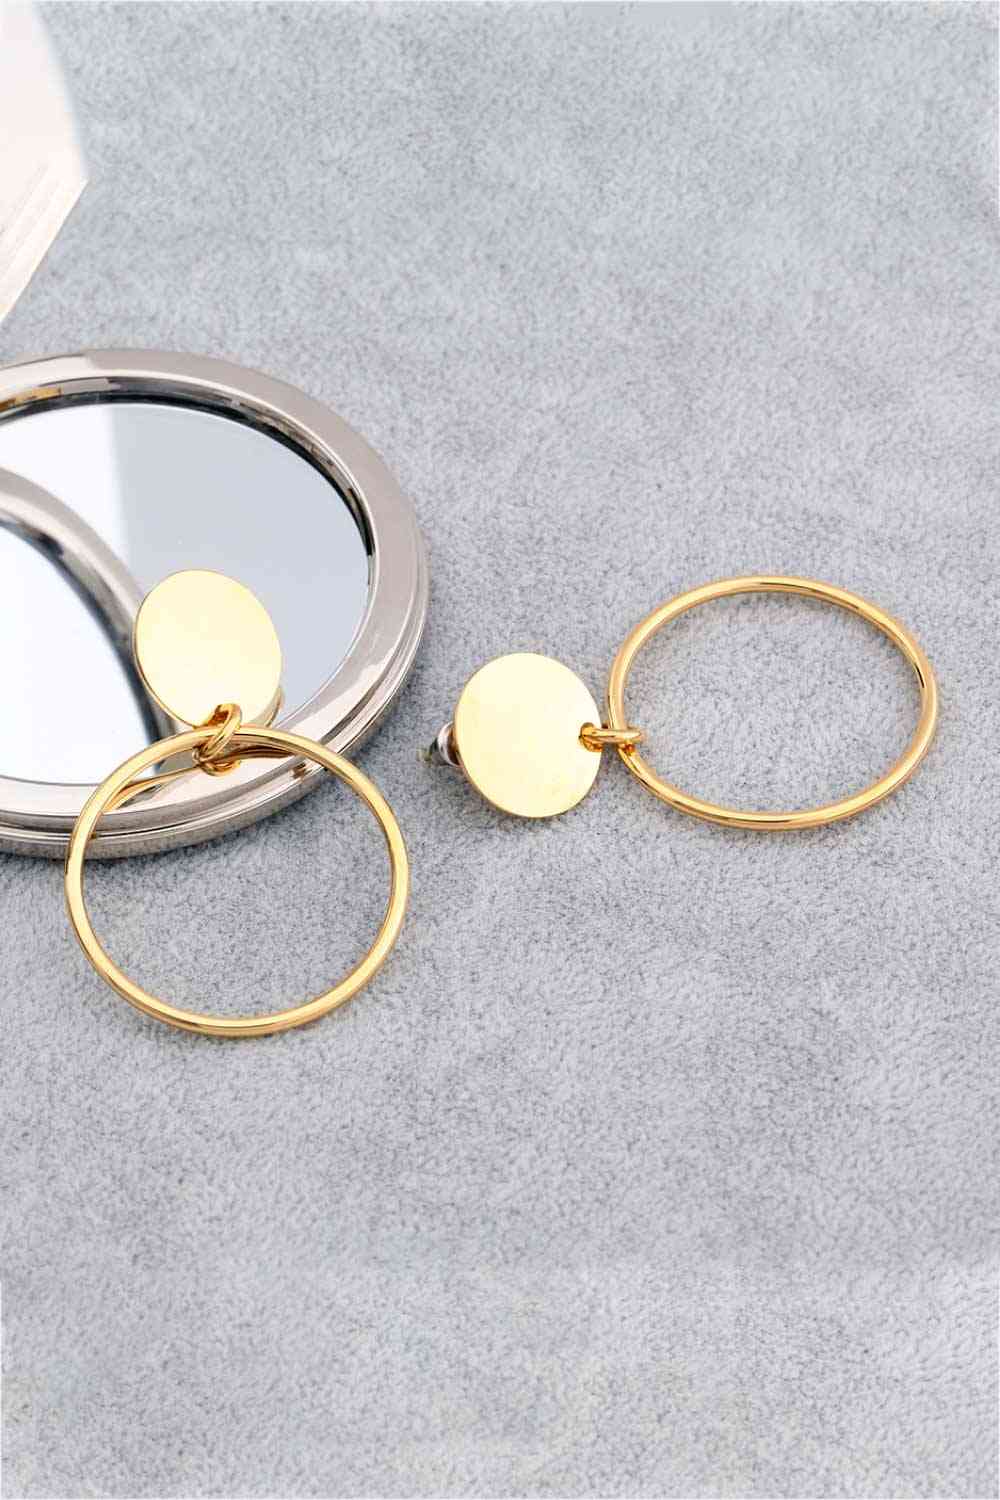 Gold-Plated Stainless Steel Drop Earrings - Everyday-Sales.com